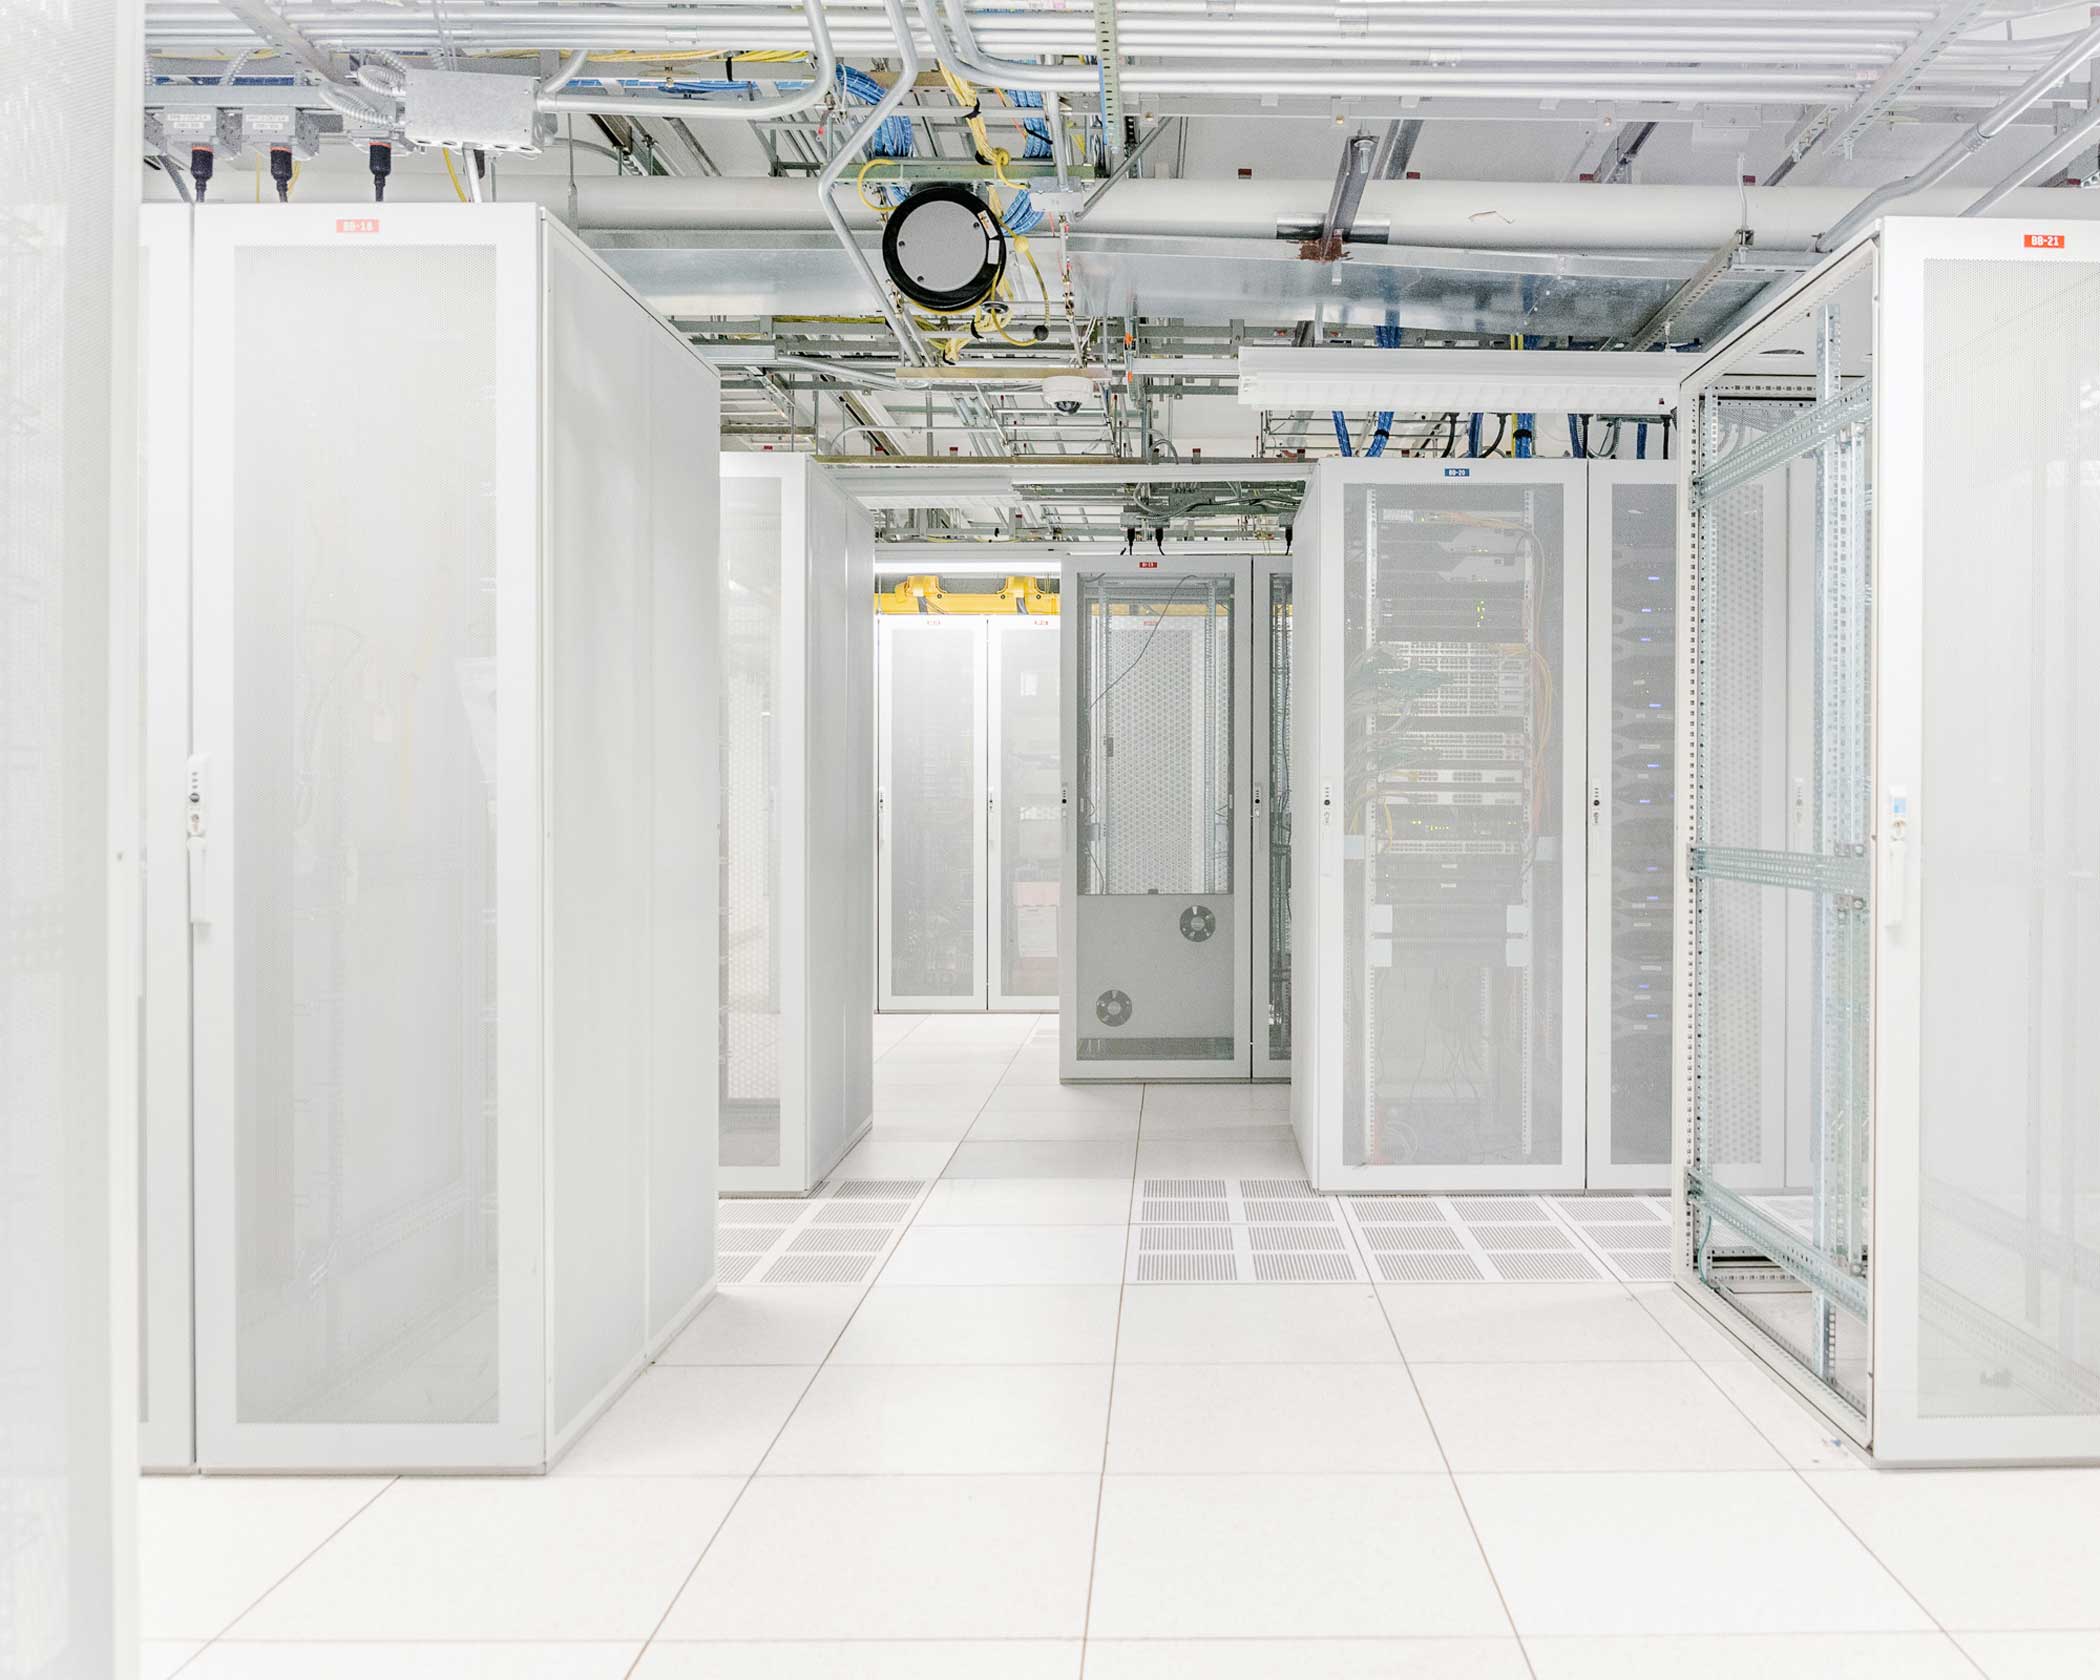 Servers racks inside a peering exchange at 85 10th Ave., where large networks exchange traffic with others when a mutual benefit exists. These facilities are  carrier neutral  so that any carrier can exchange traffic with another- a policy which and makes peering efficient.